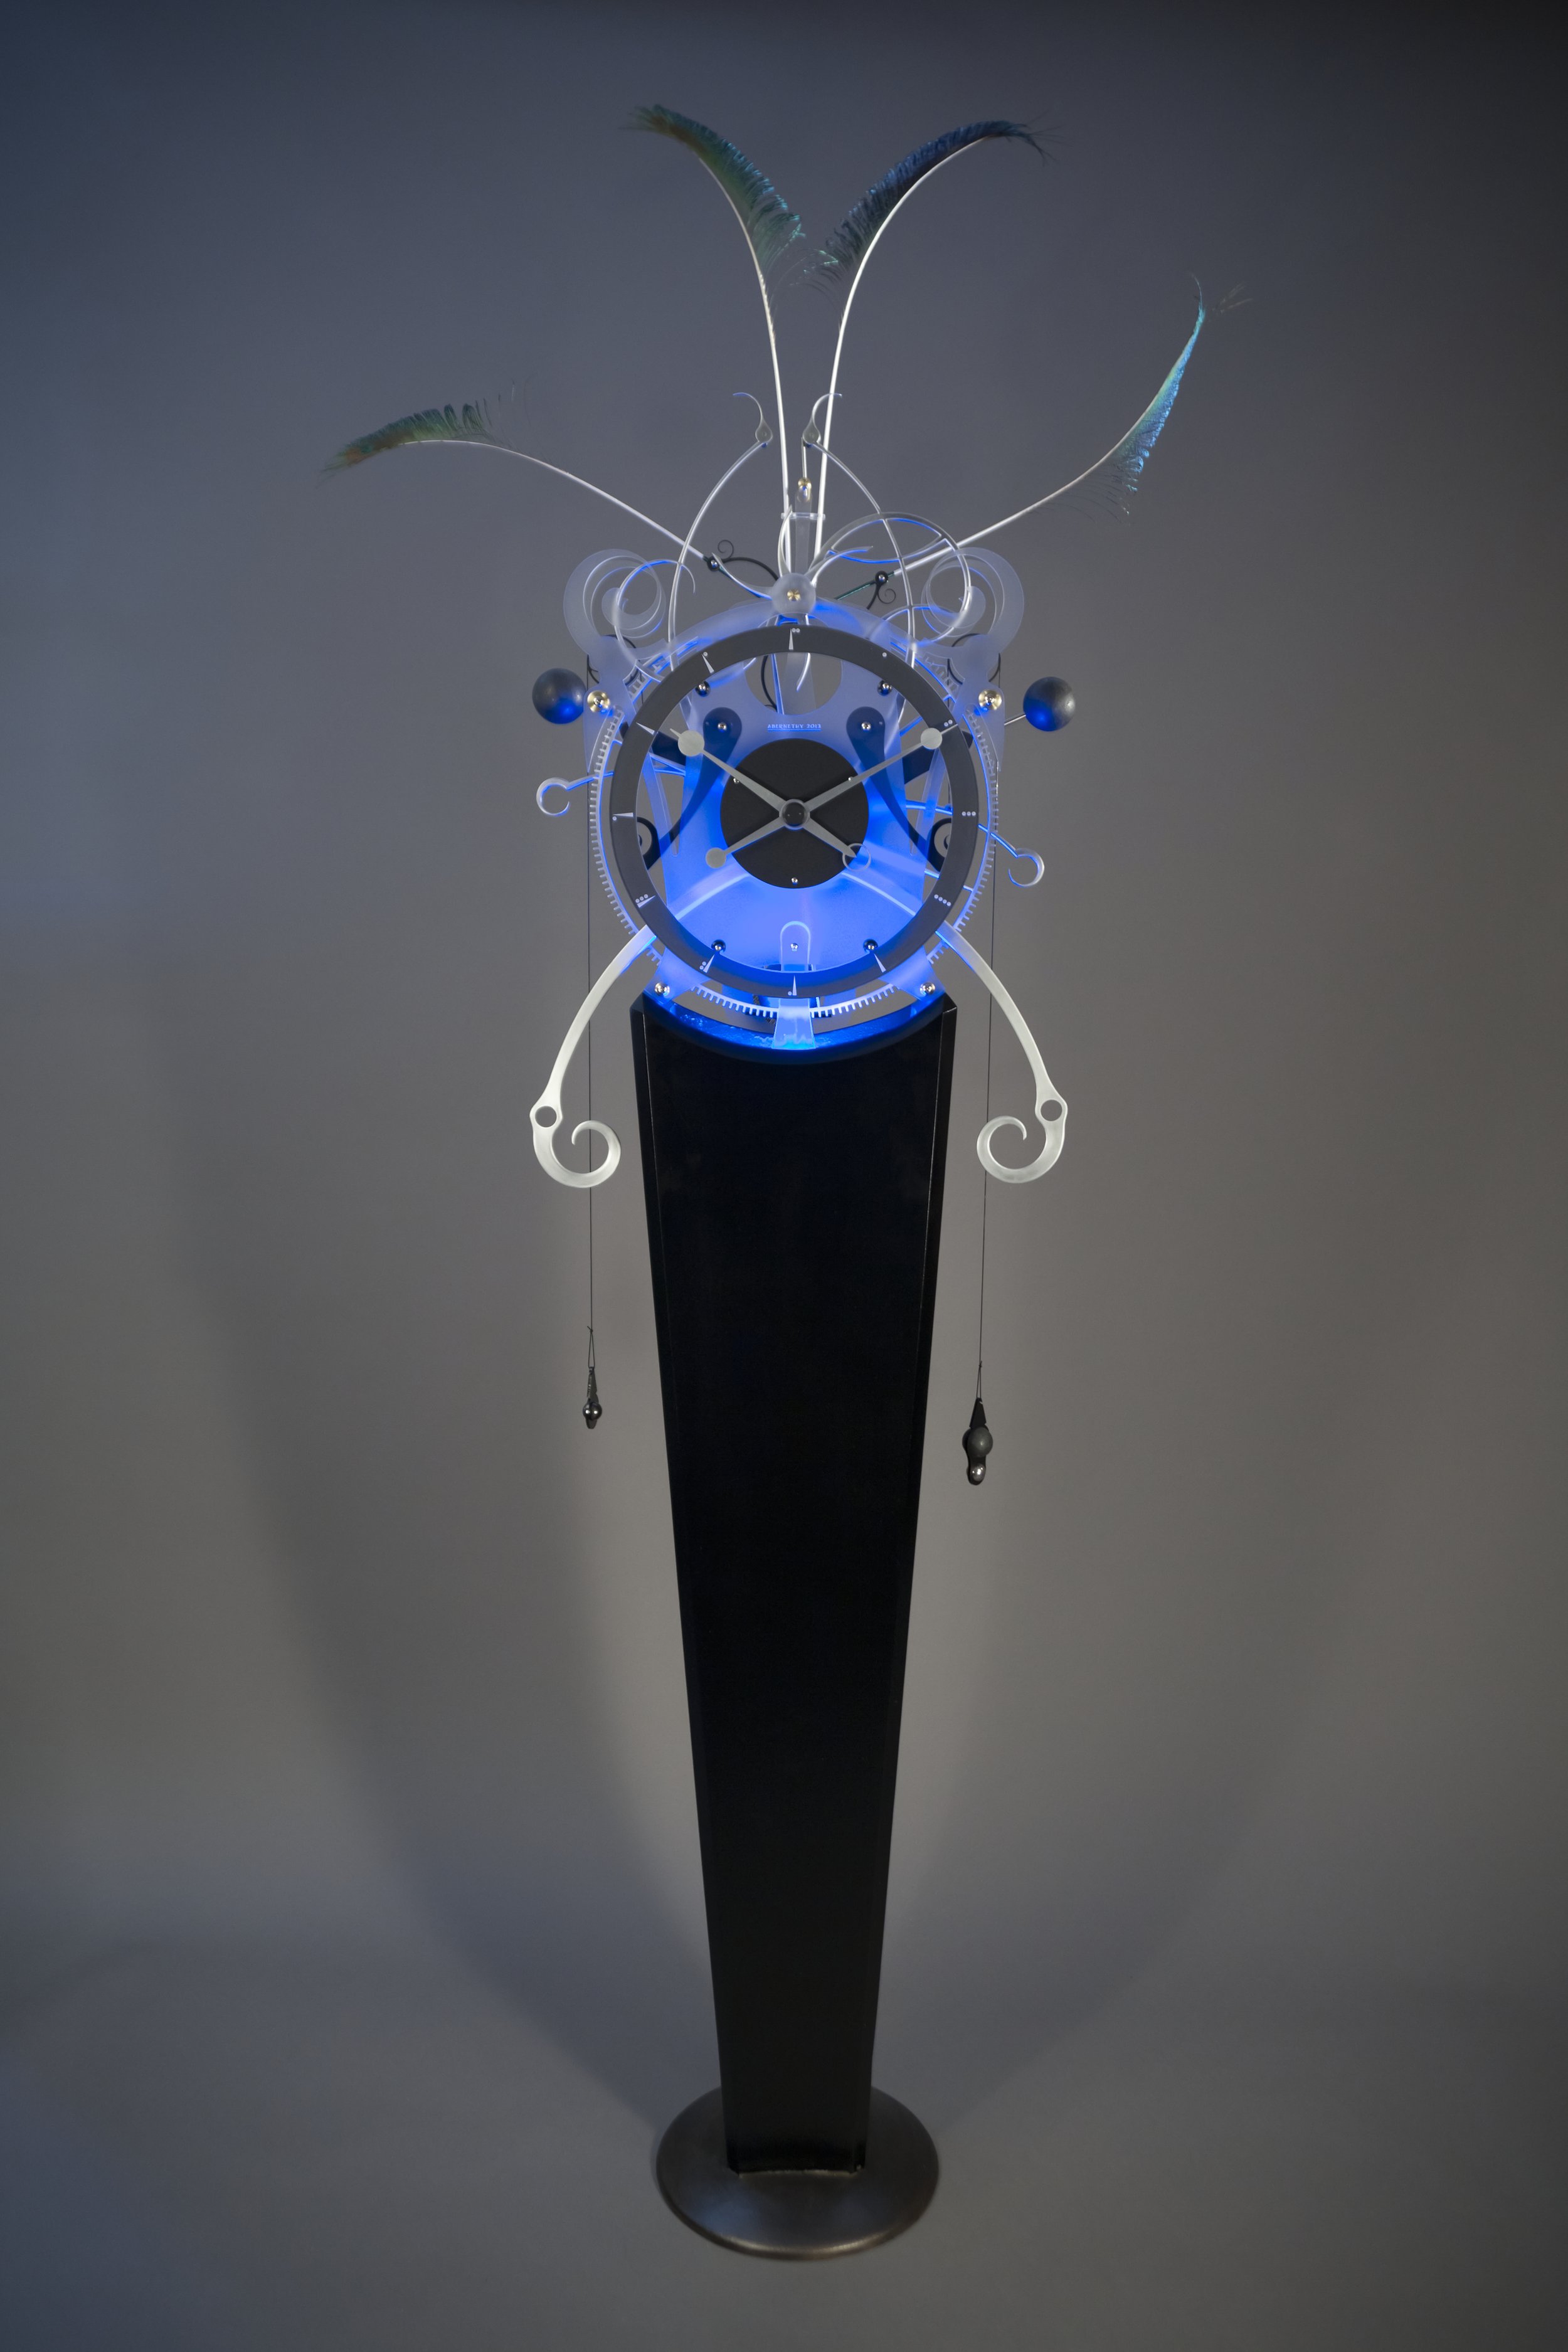   Insionn , 2020. Copper, brass, aluminum, acrylic, peacock feathers, gravity escapement and LED lighting, 200 x 84 x 28 cm. Photo: Mark Hopper Photography. 